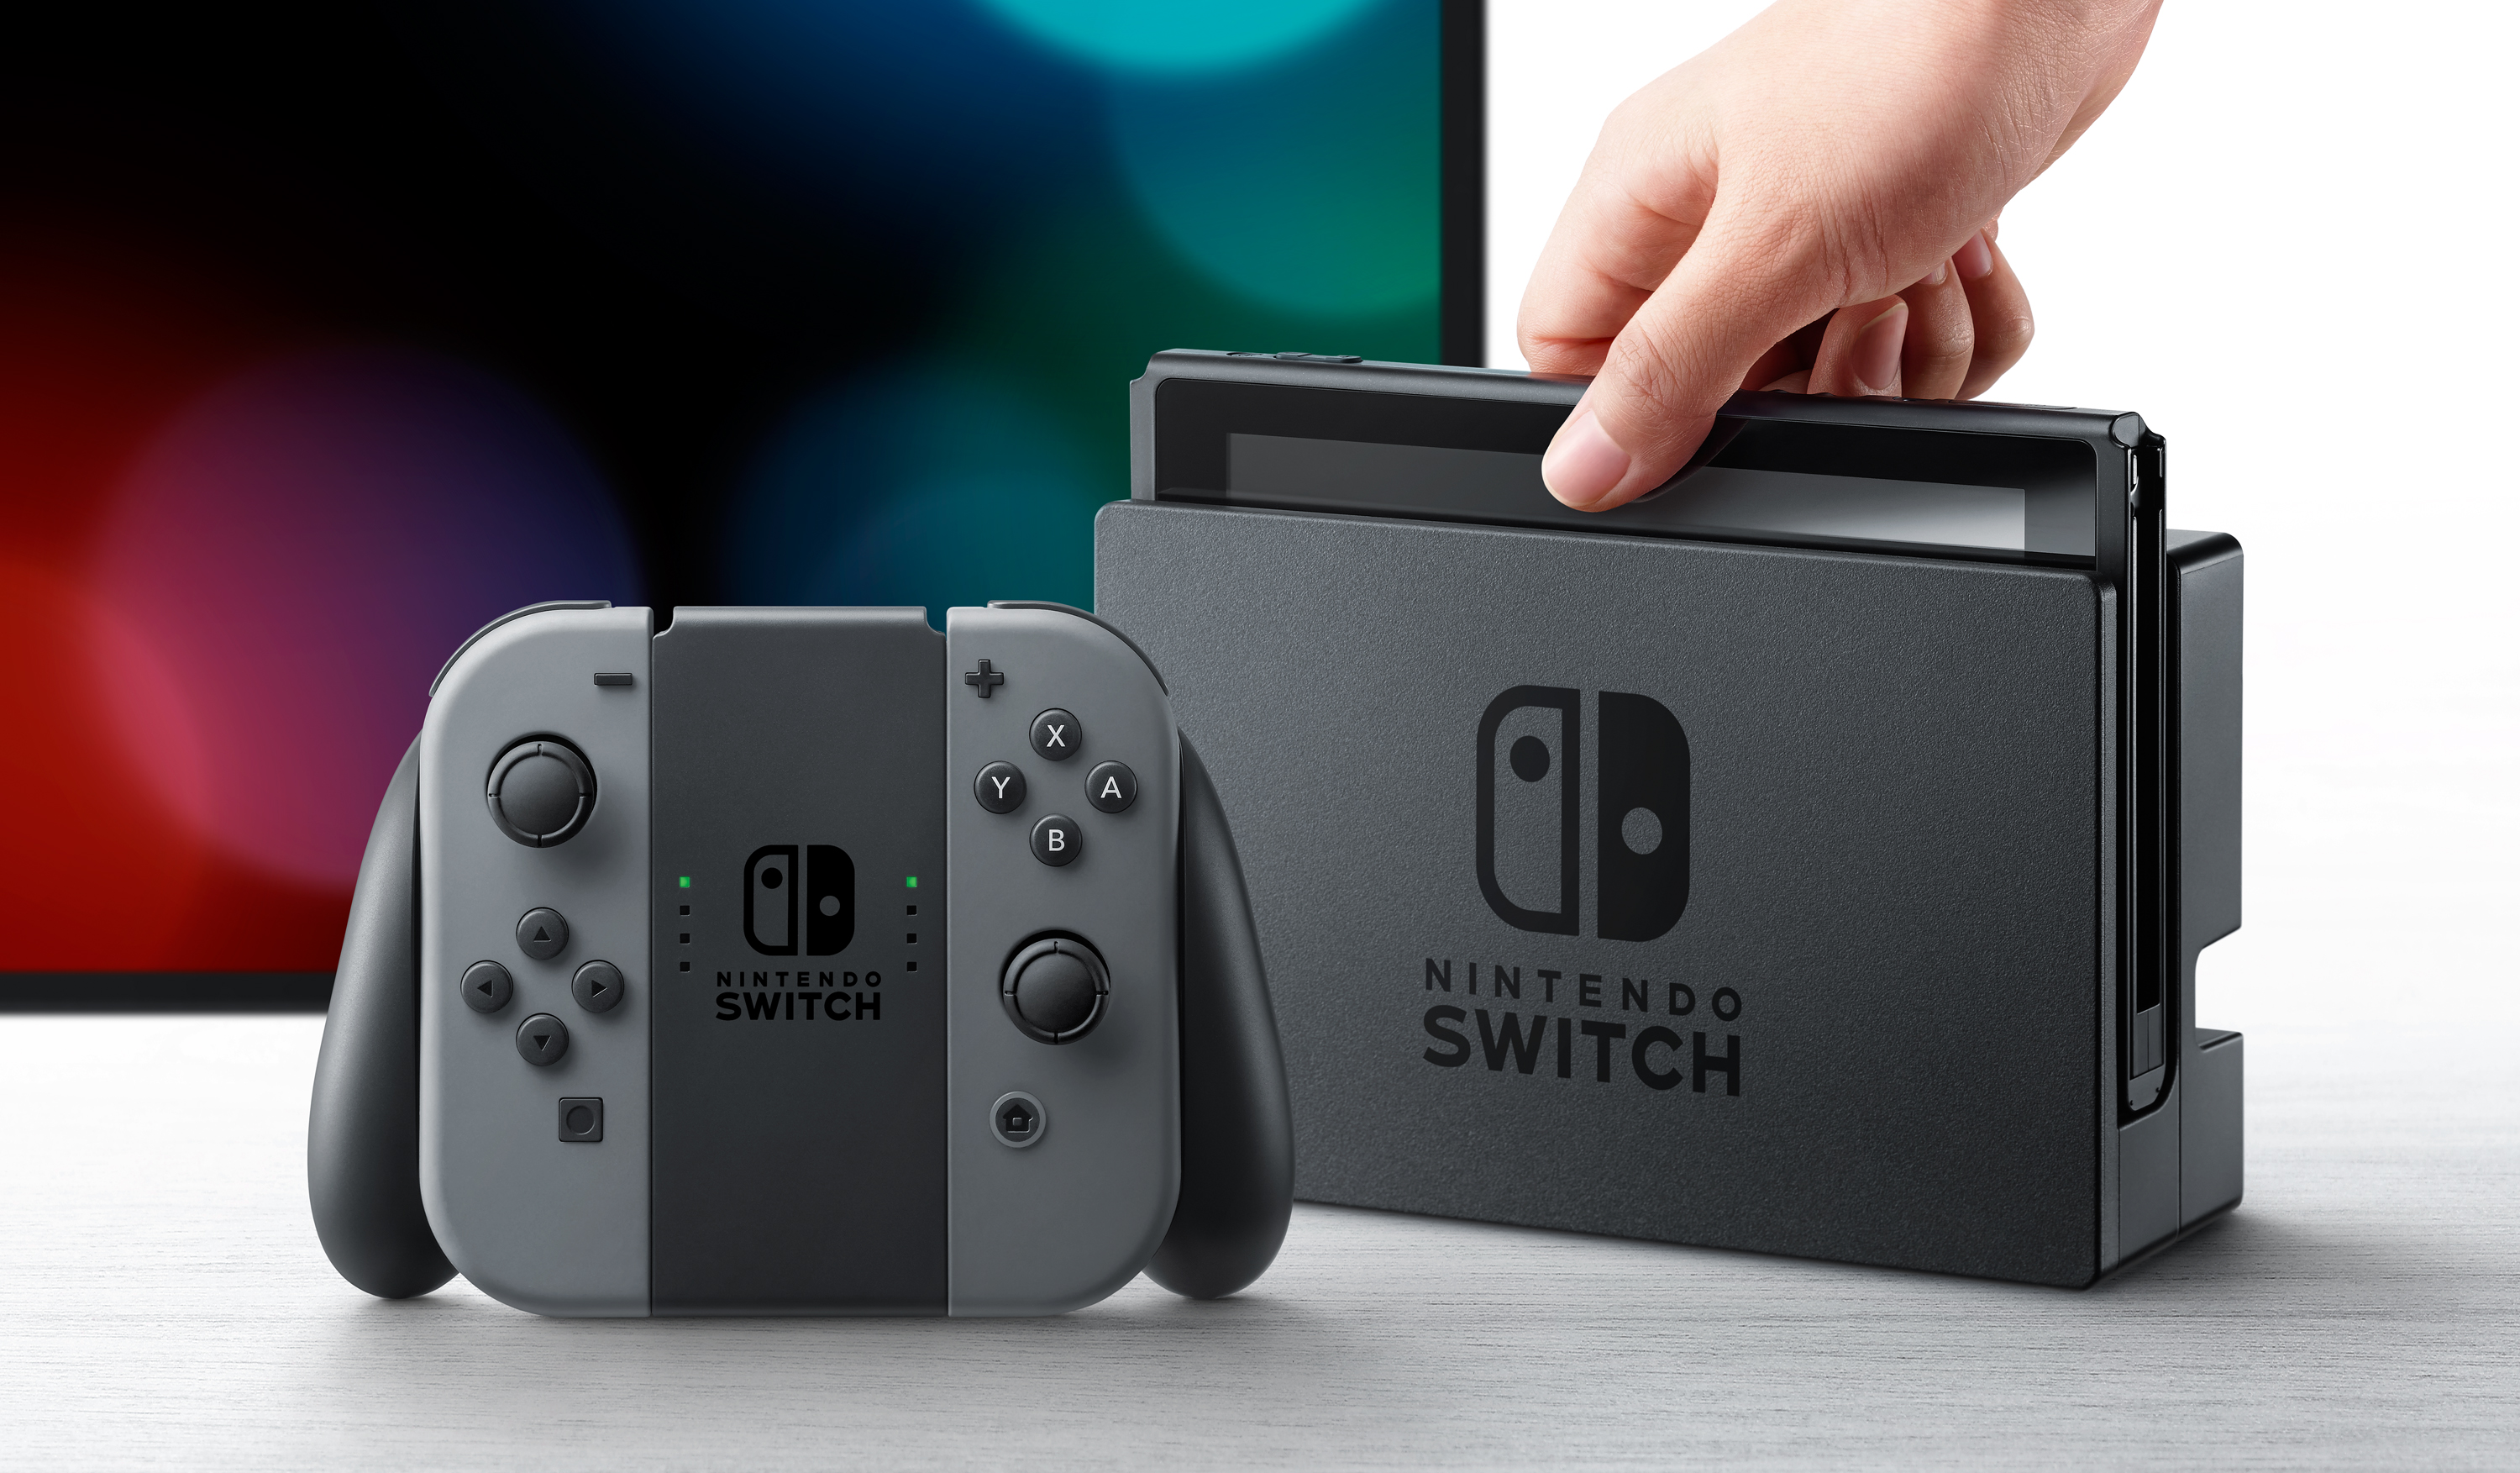 It Takes Two' launches on Nintendo Switch 